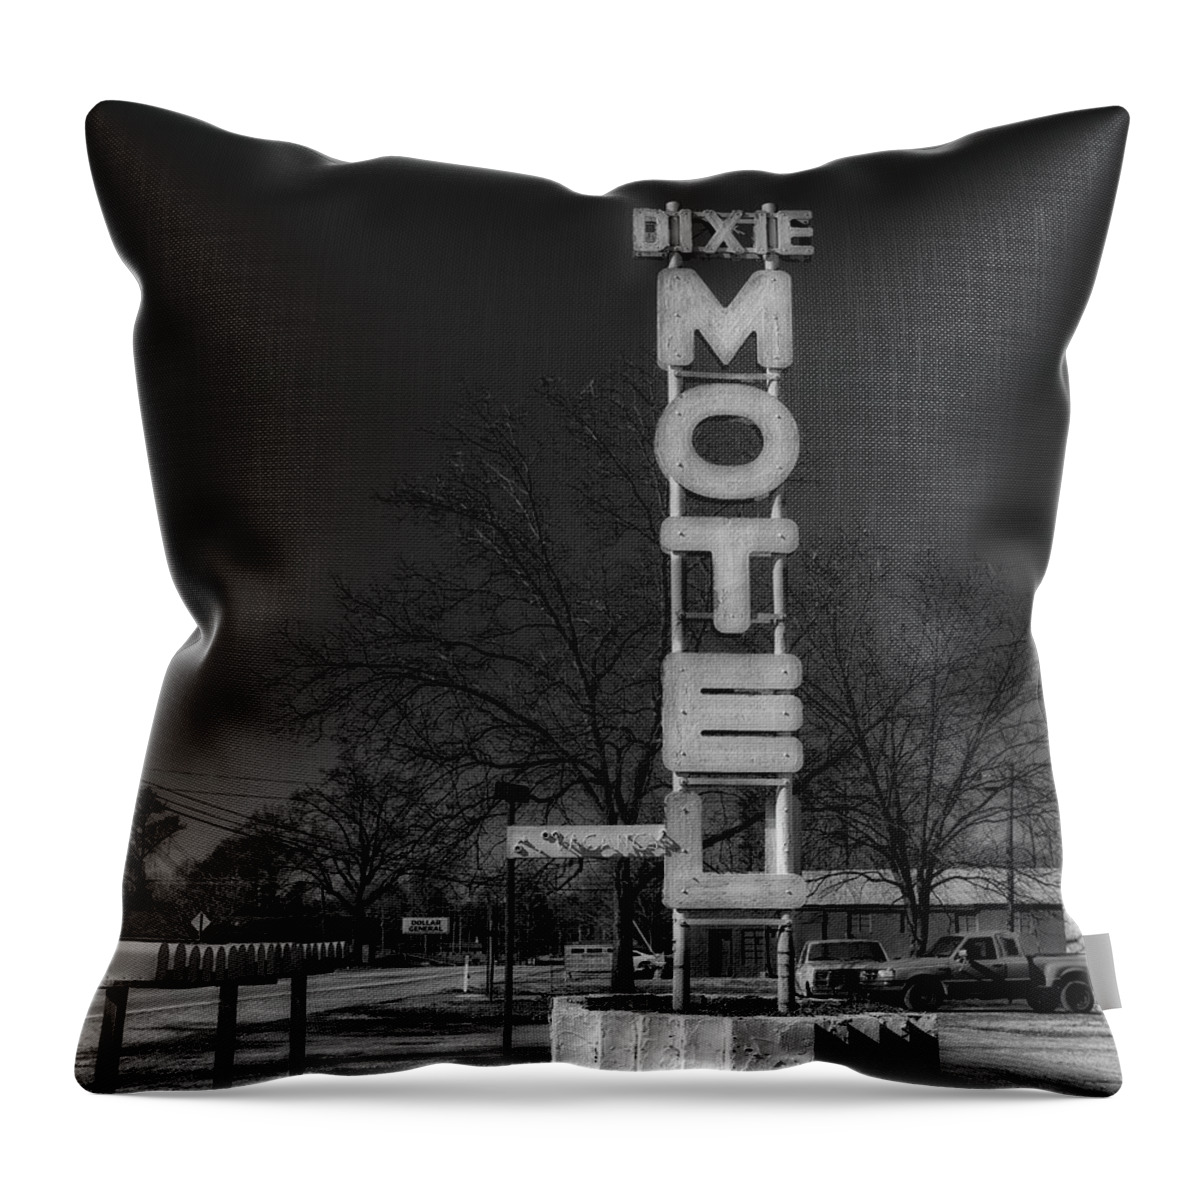 Georgia Throw Pillow featuring the photograph Dixie Motel by Lenore Locken